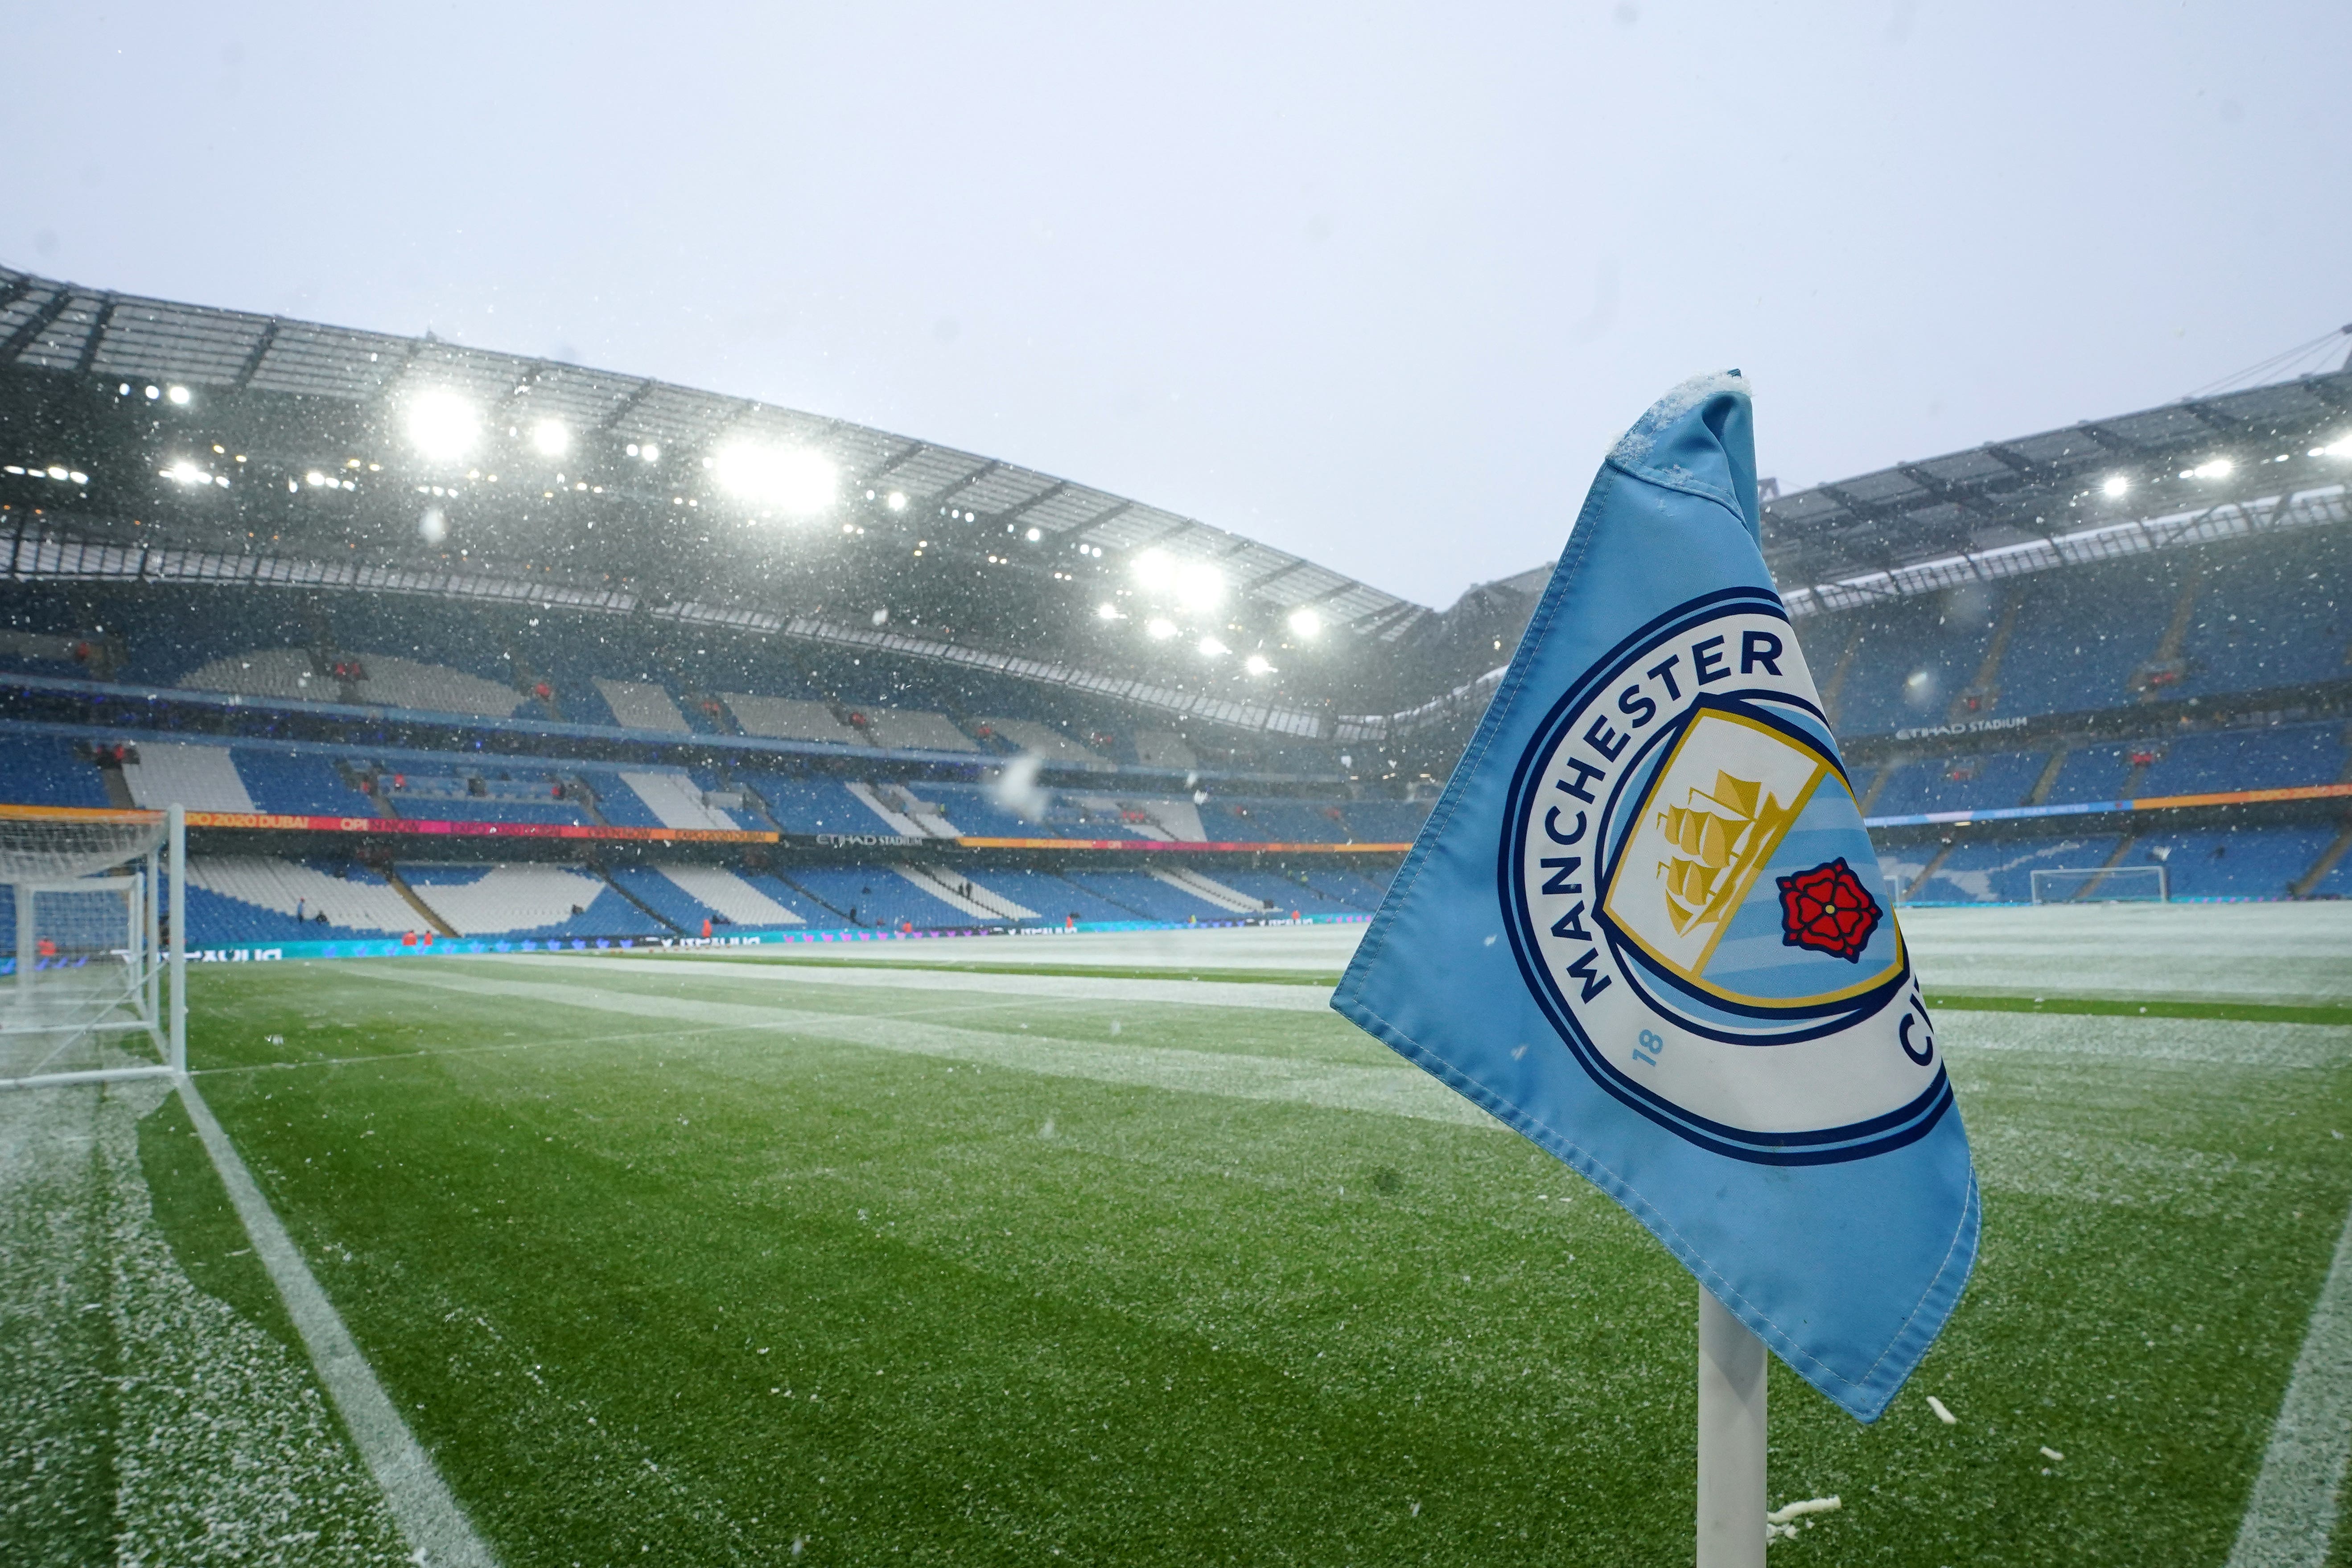 Manchester City could be docked points or even expelled from the Premier League if the alleged breaches of league rules are found proven